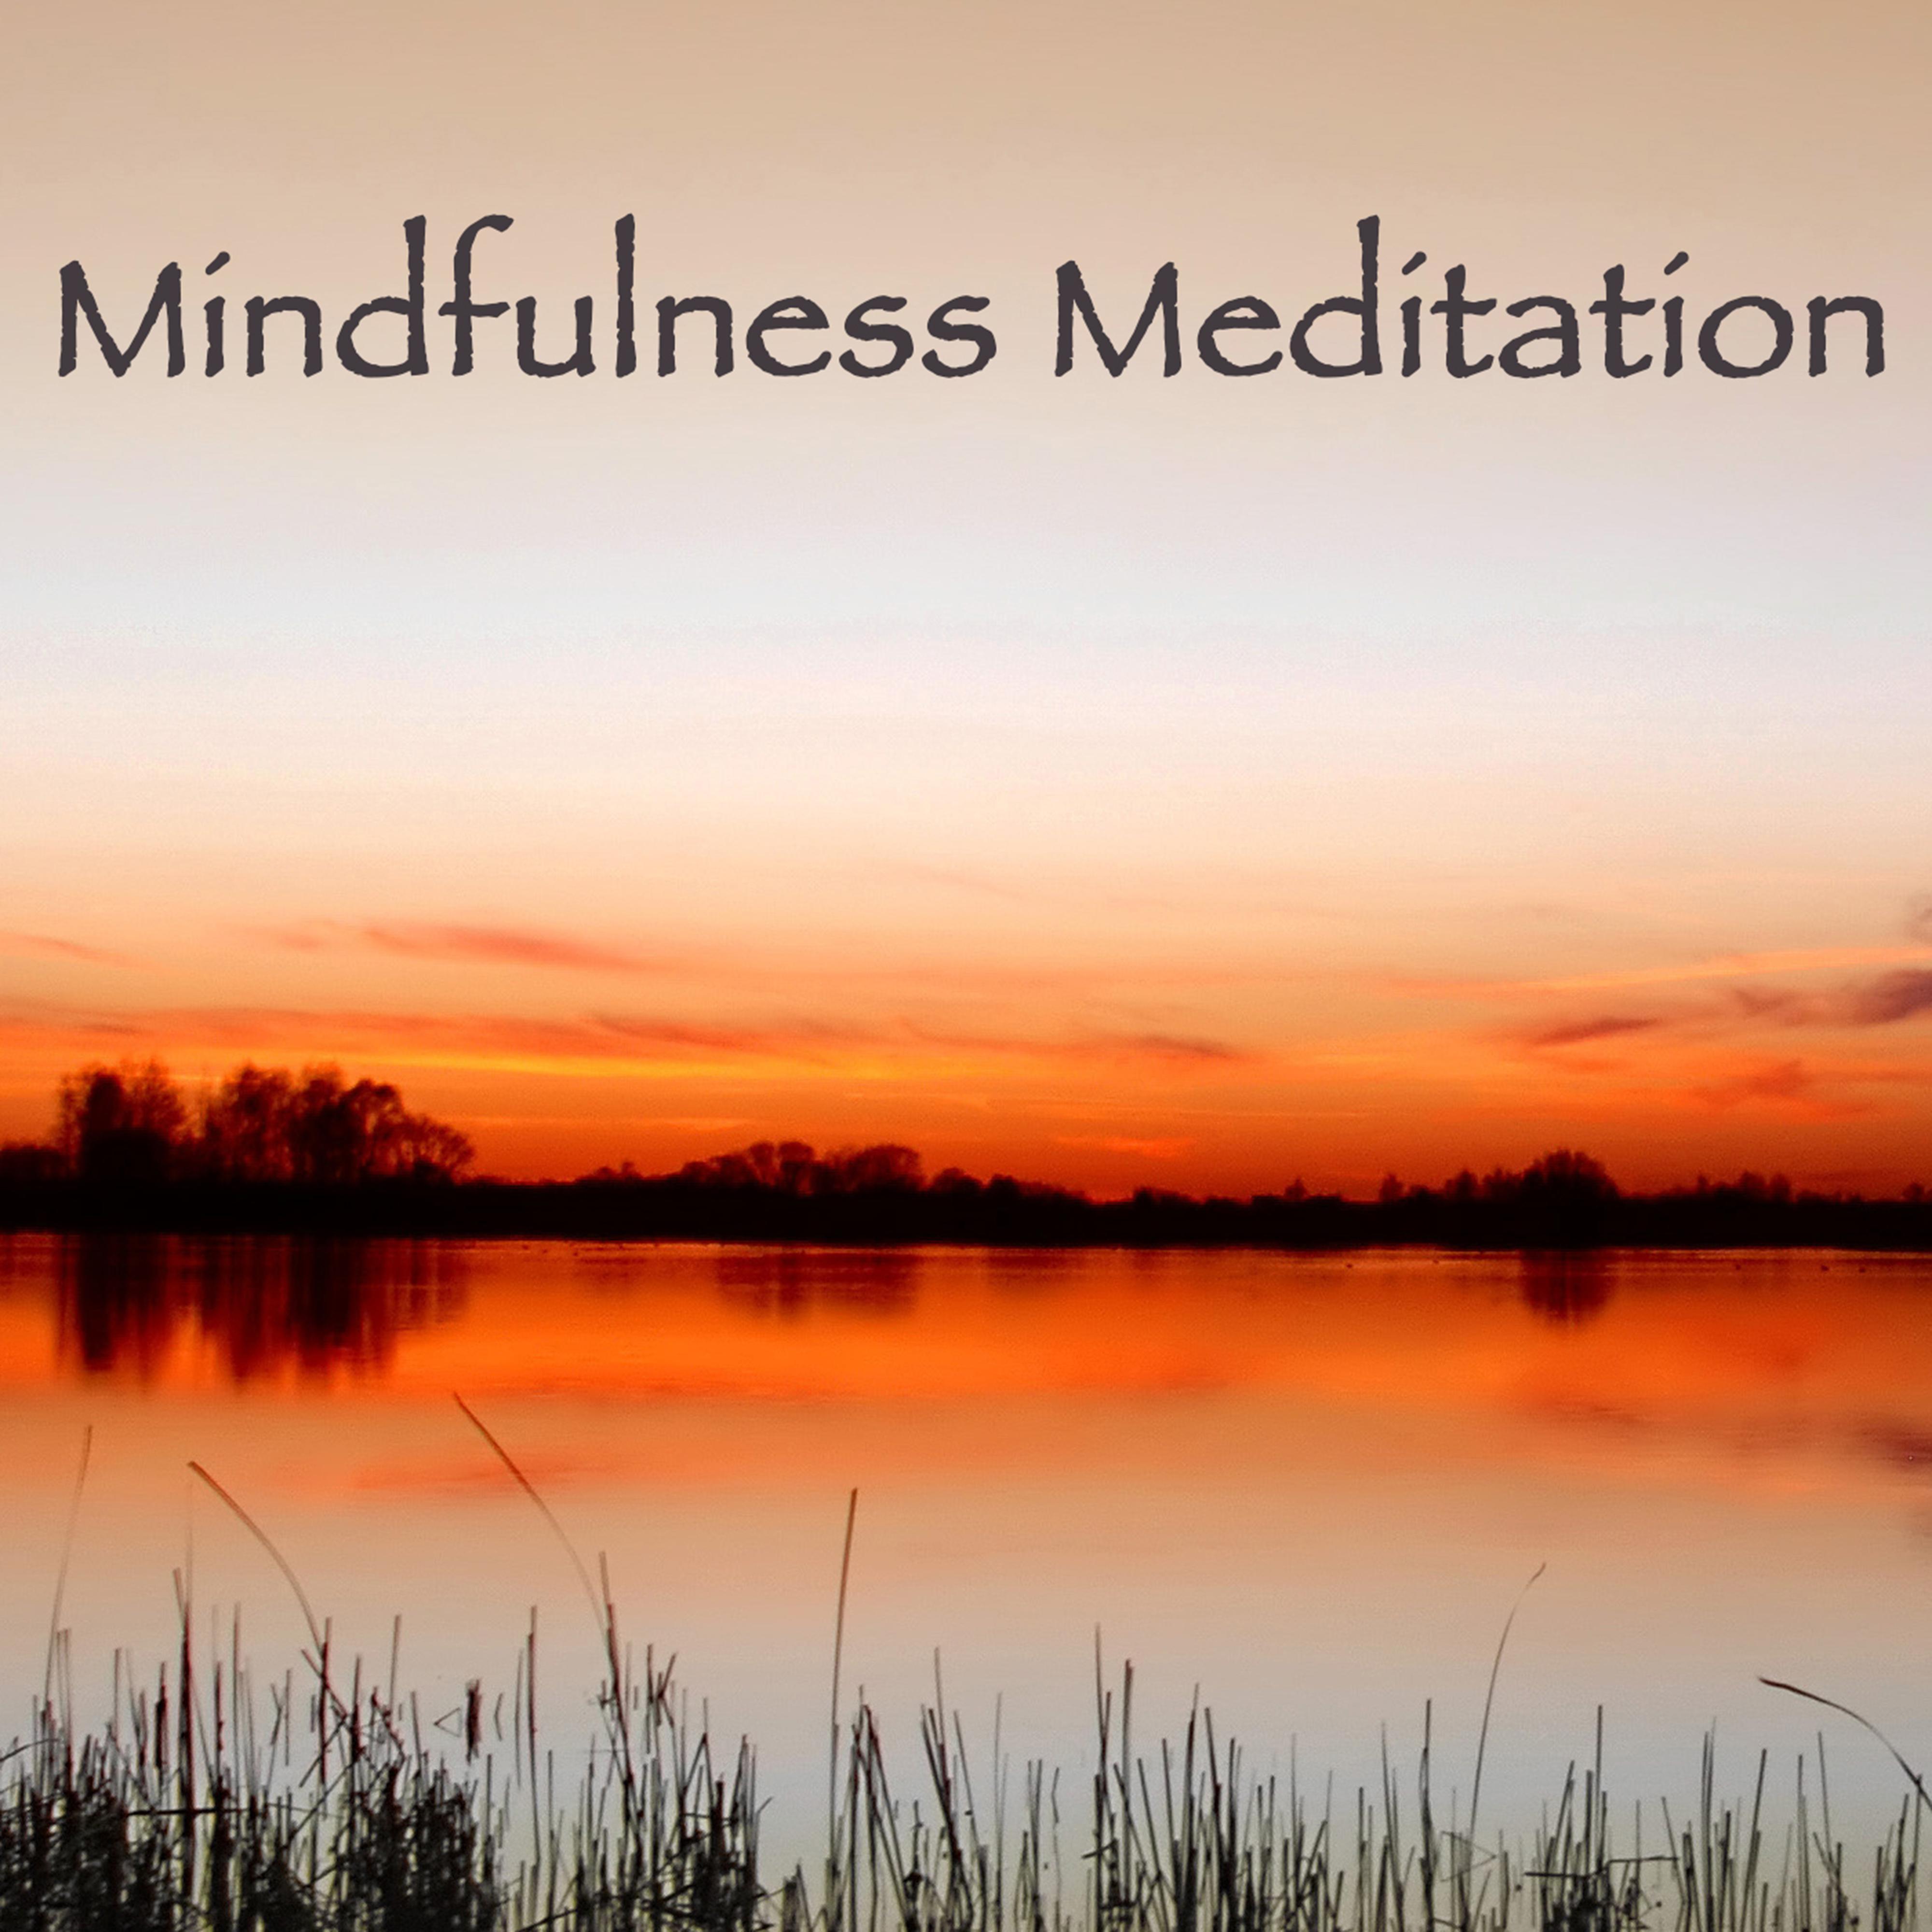 Mindfulness Meditation Spiritual Healing – Chillout Relaxation Music for Meditation, Relax and Sleep